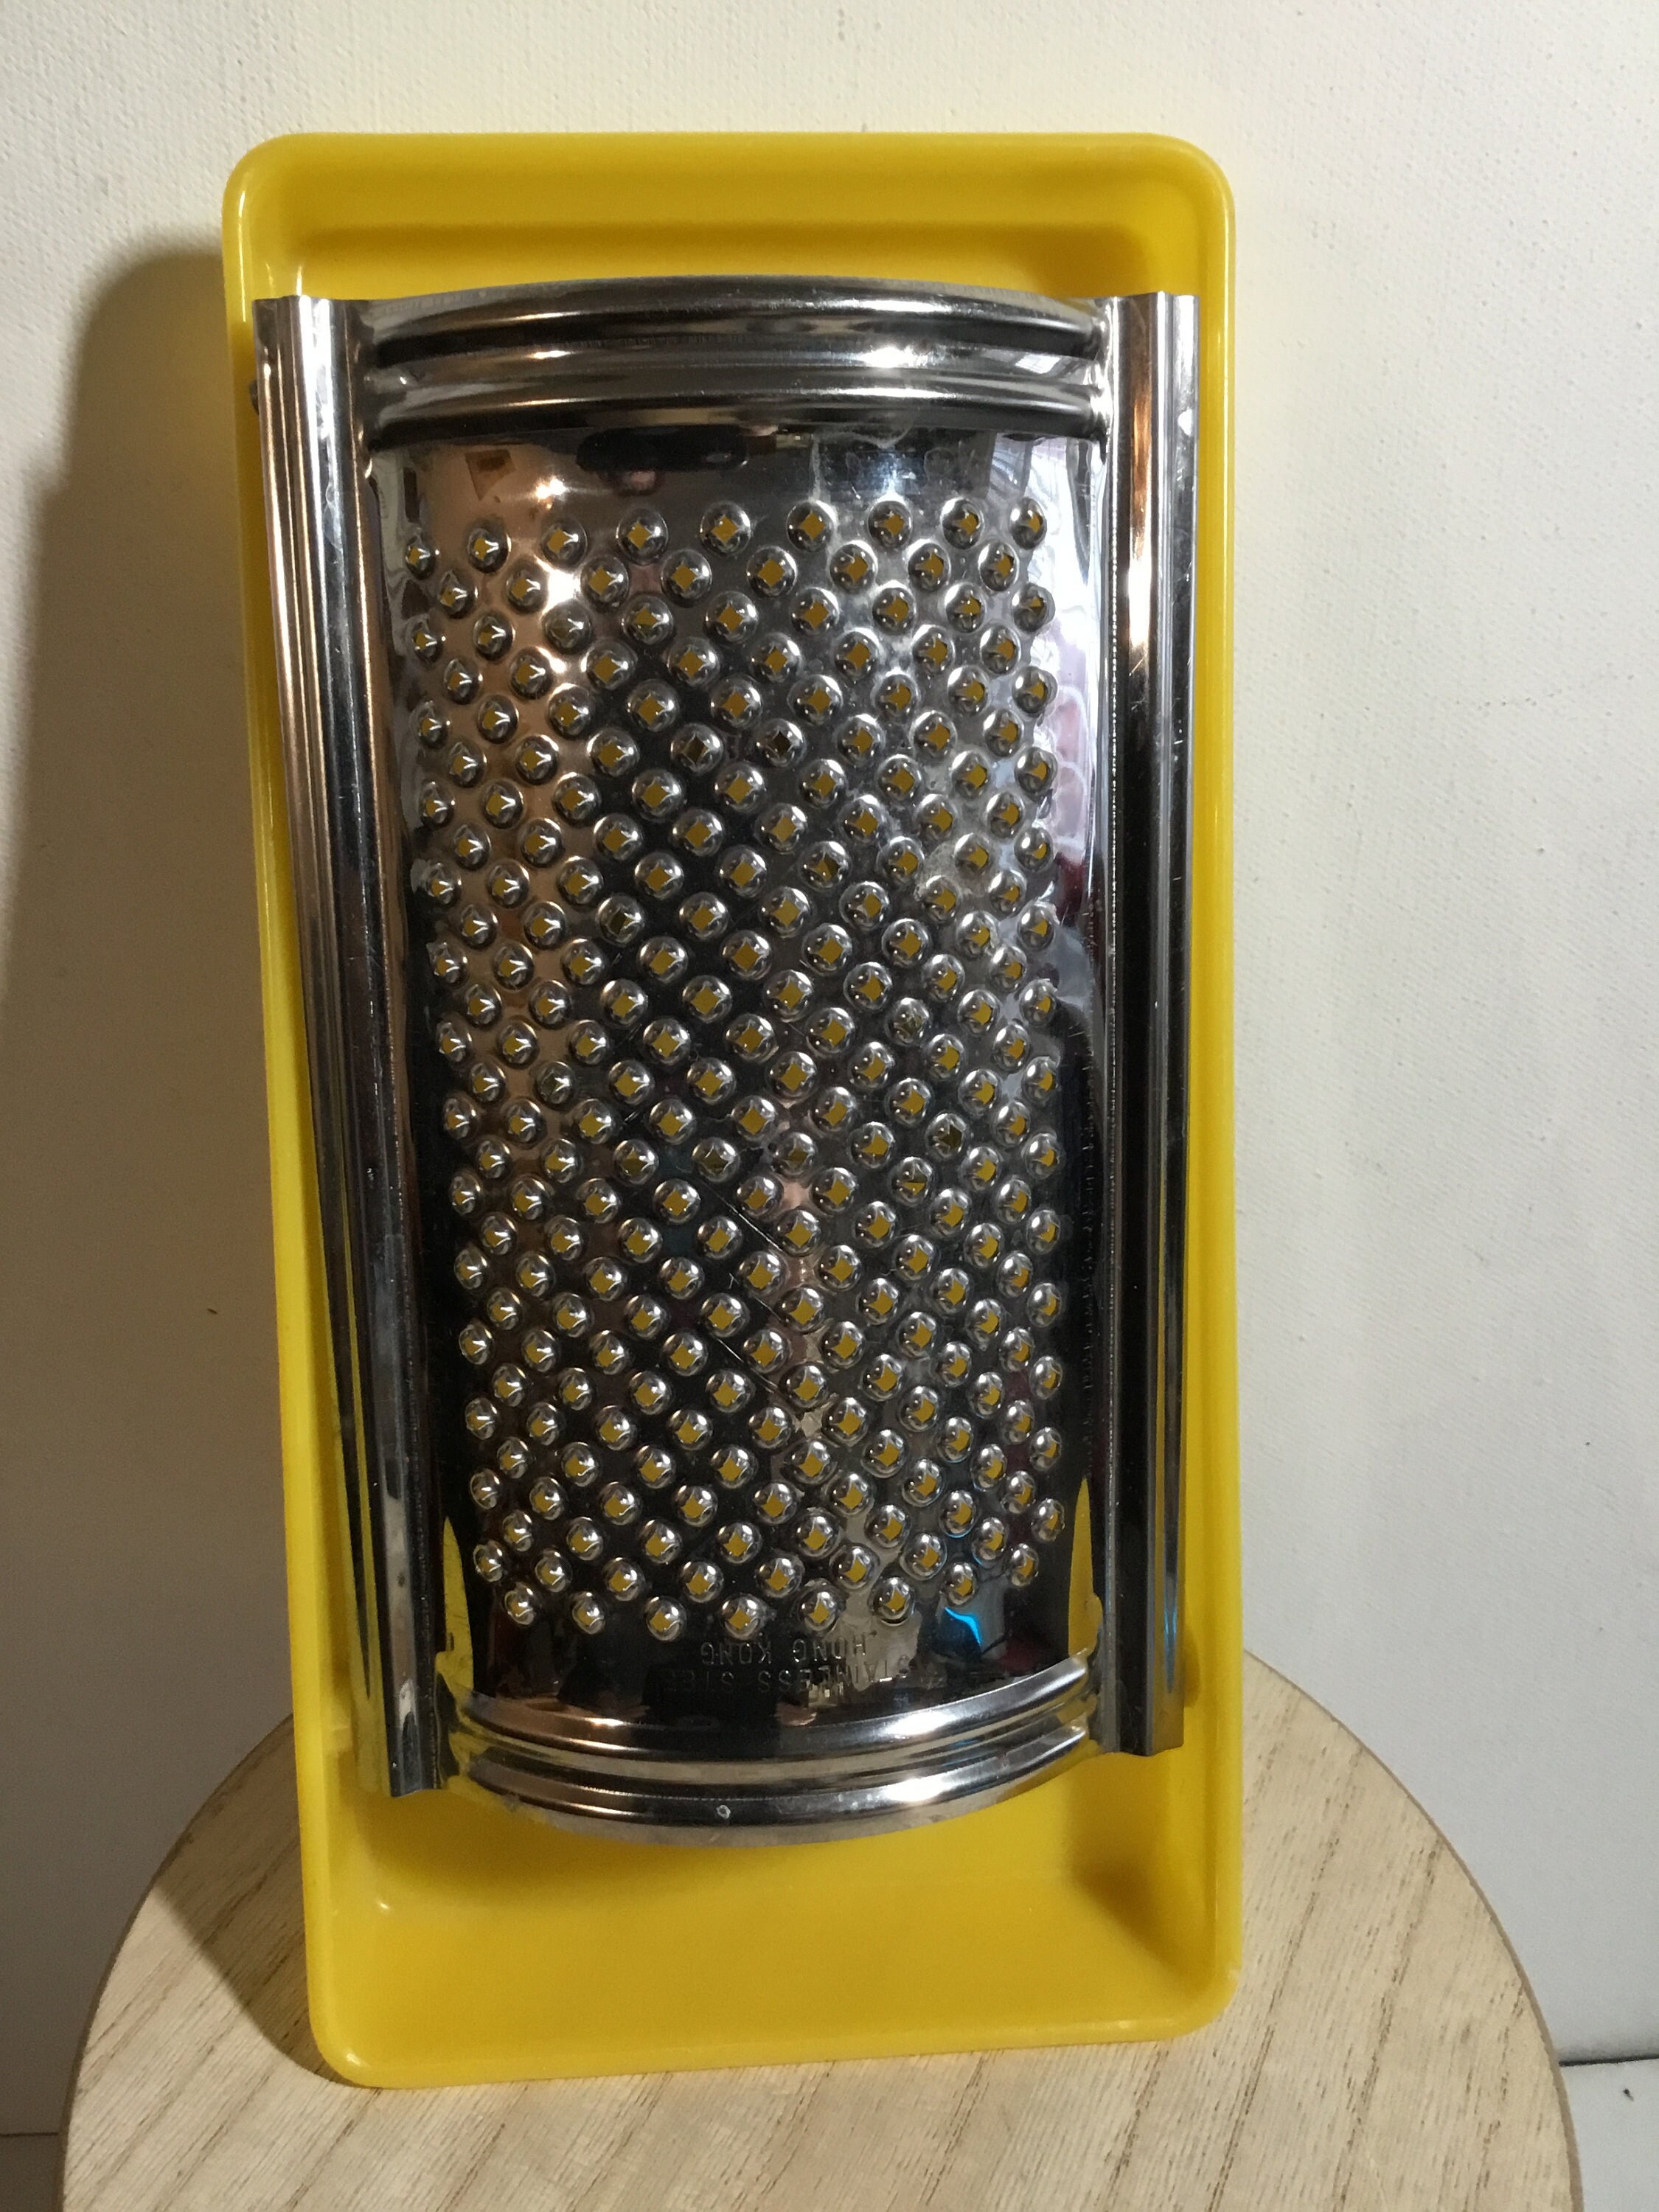 Vintage French Mouli Rape Hand Held Cheese Grater, Retro 1930s